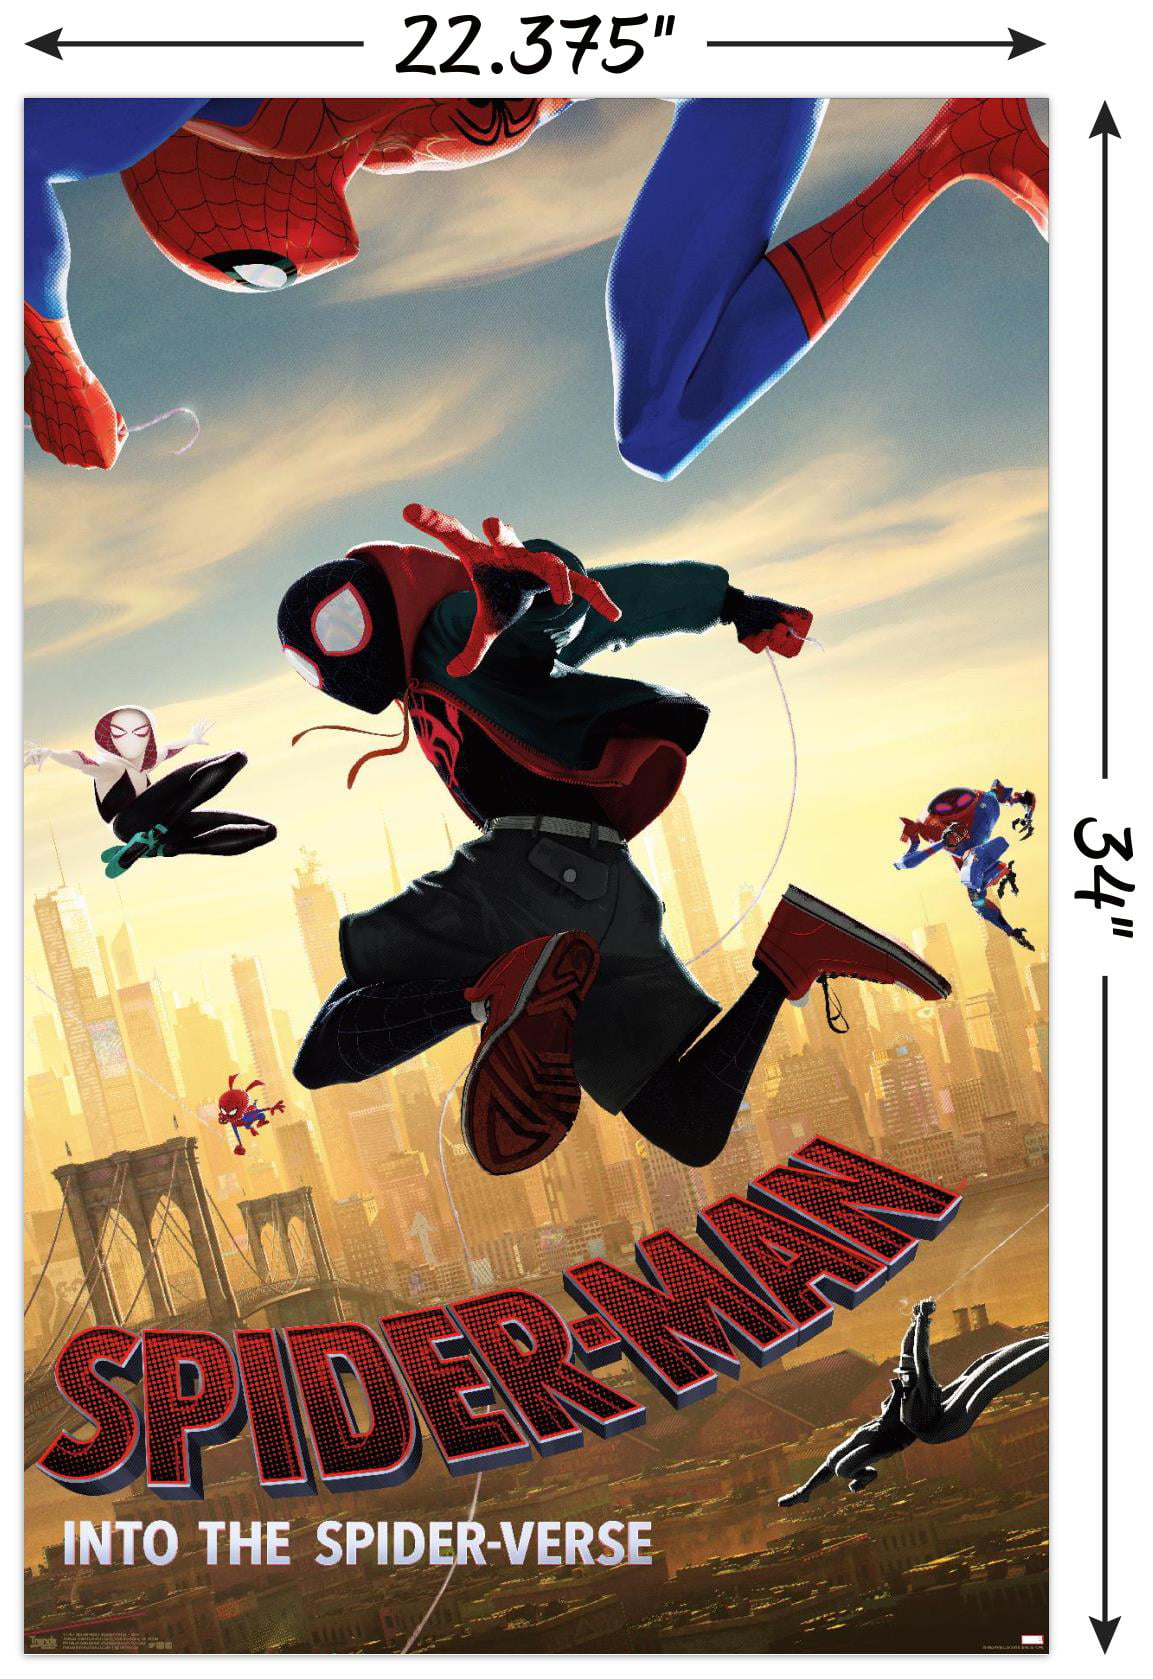 Marvel MCU - Spider-Man - Into The Spider-Verse - Dive Wall Poster, 22.375  x 34